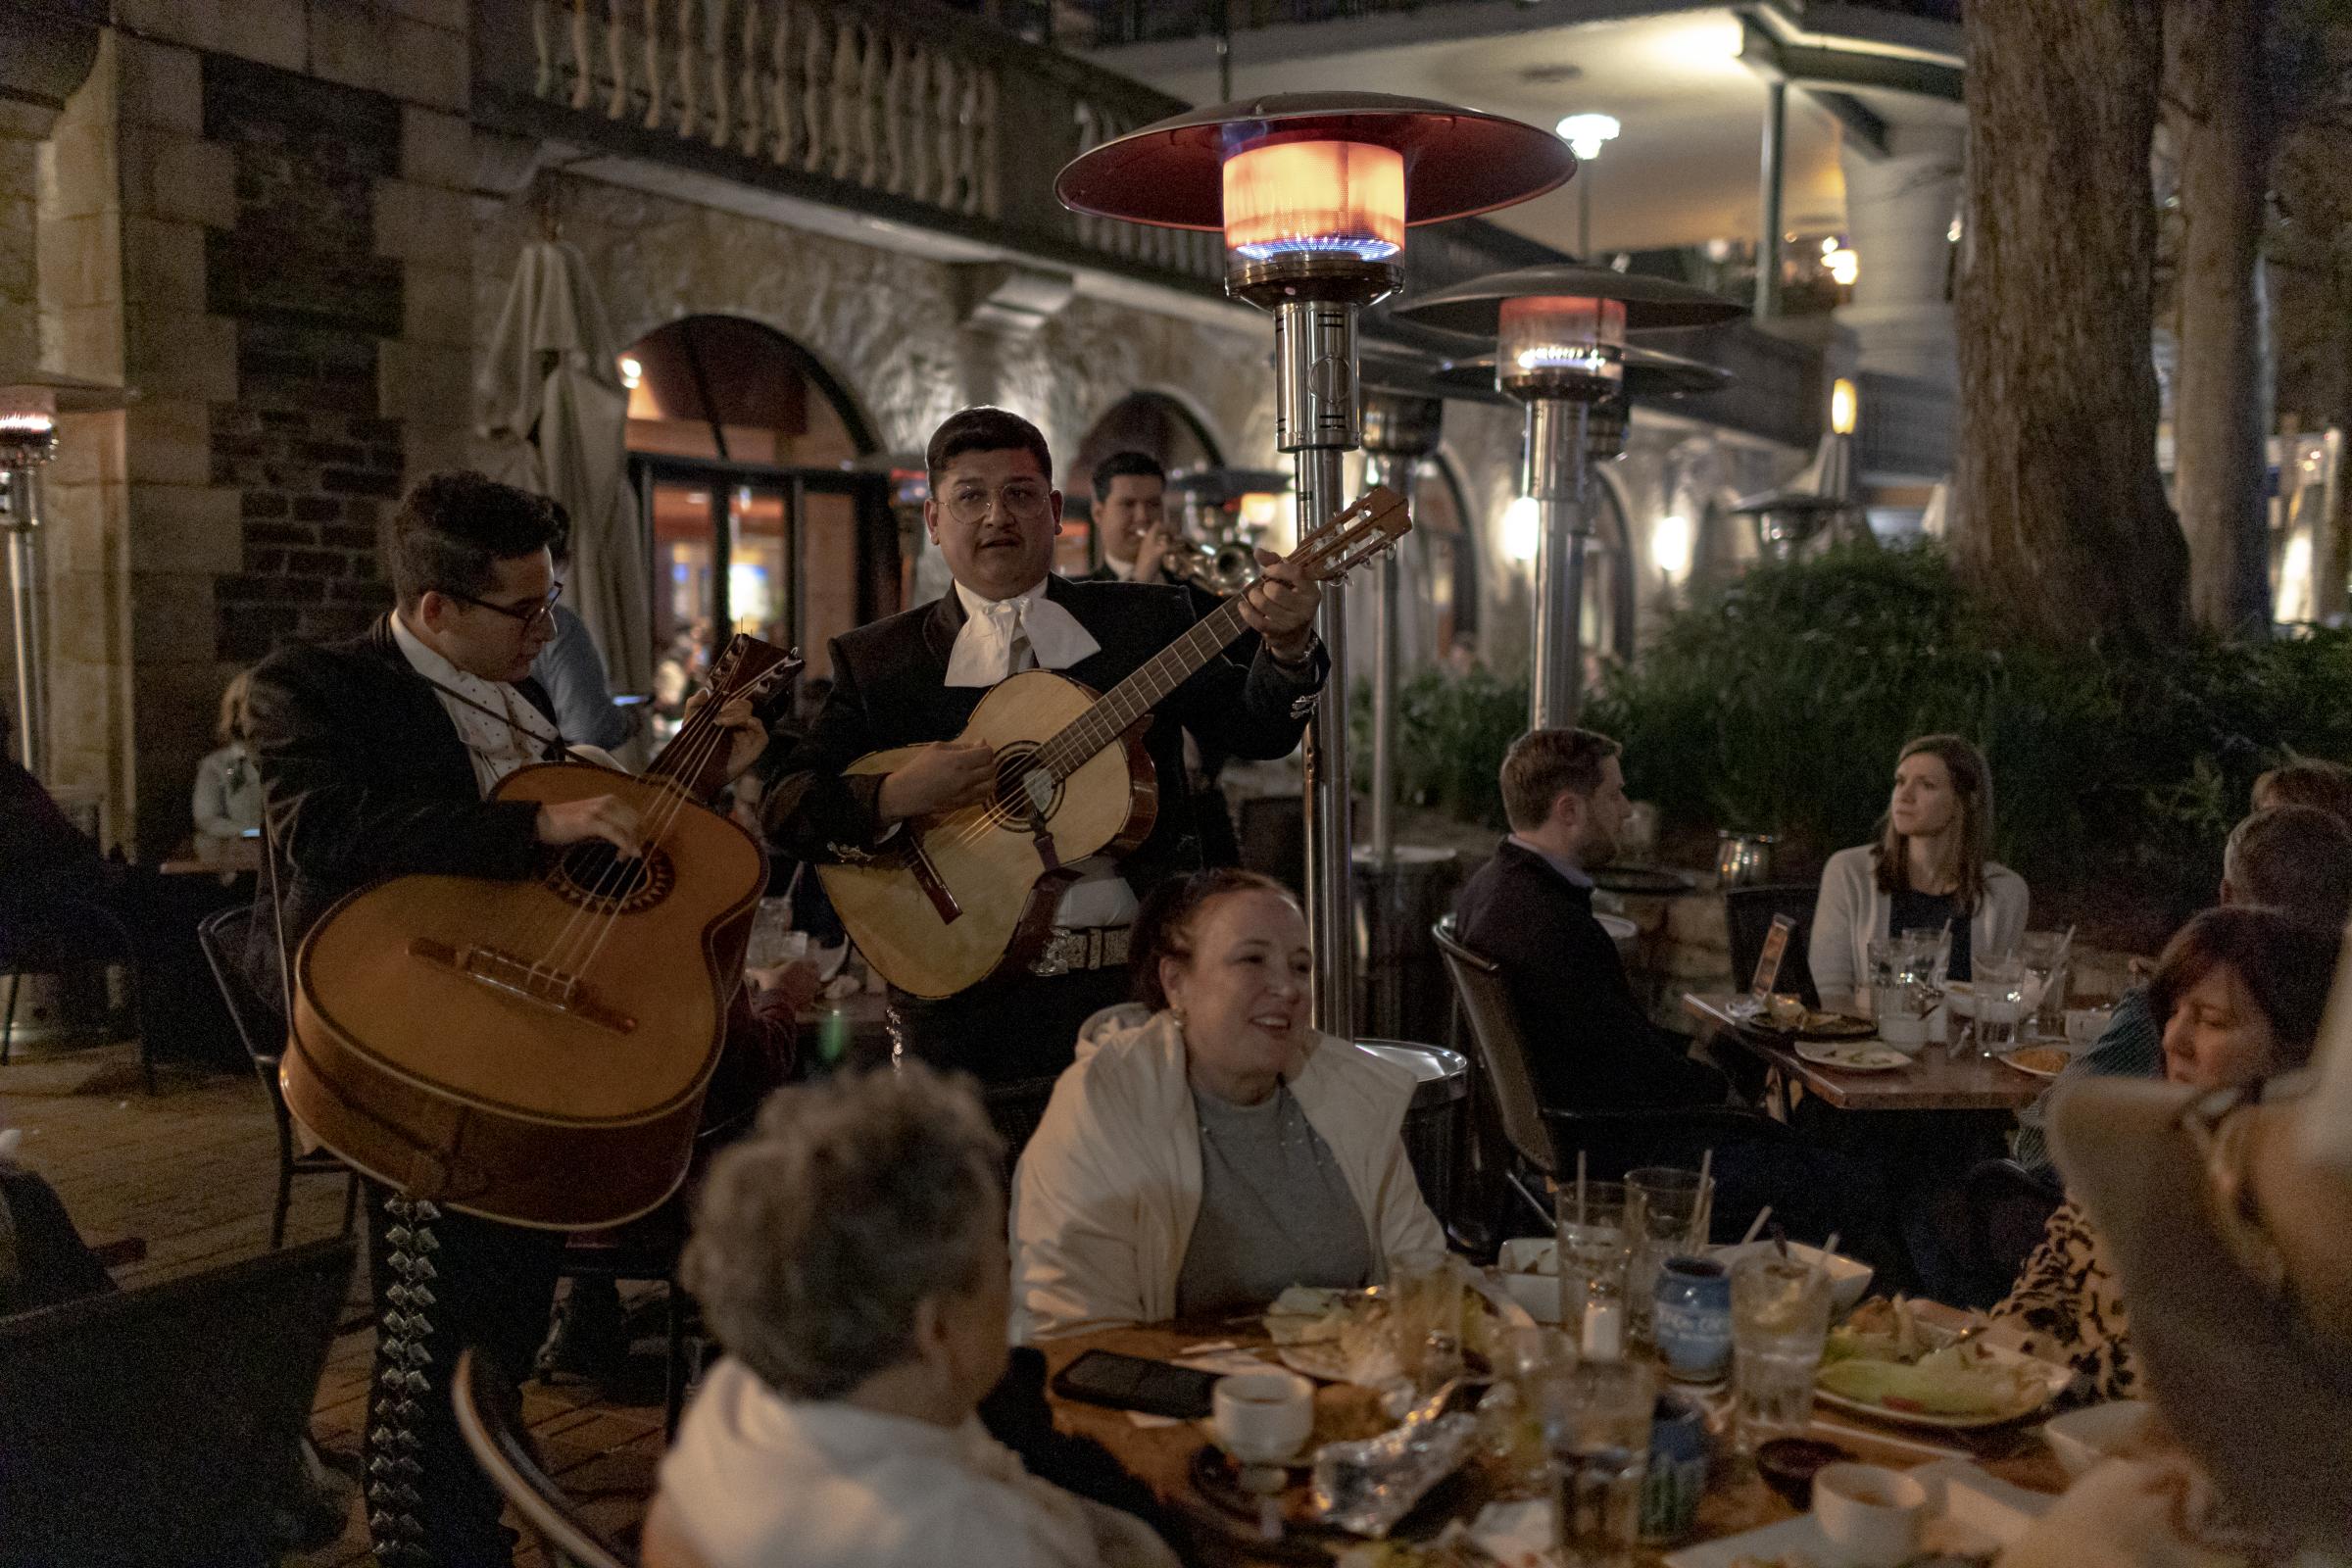 A group of mariachis performs in front of dinner guests at a local restaurant in San Antonio, Texas, 01/4/2022. While the omicron variant of the COVID-19 virus rapidly spikes in American Cities, Texas does not require masks to be worn in public, or for public places to be monitored.